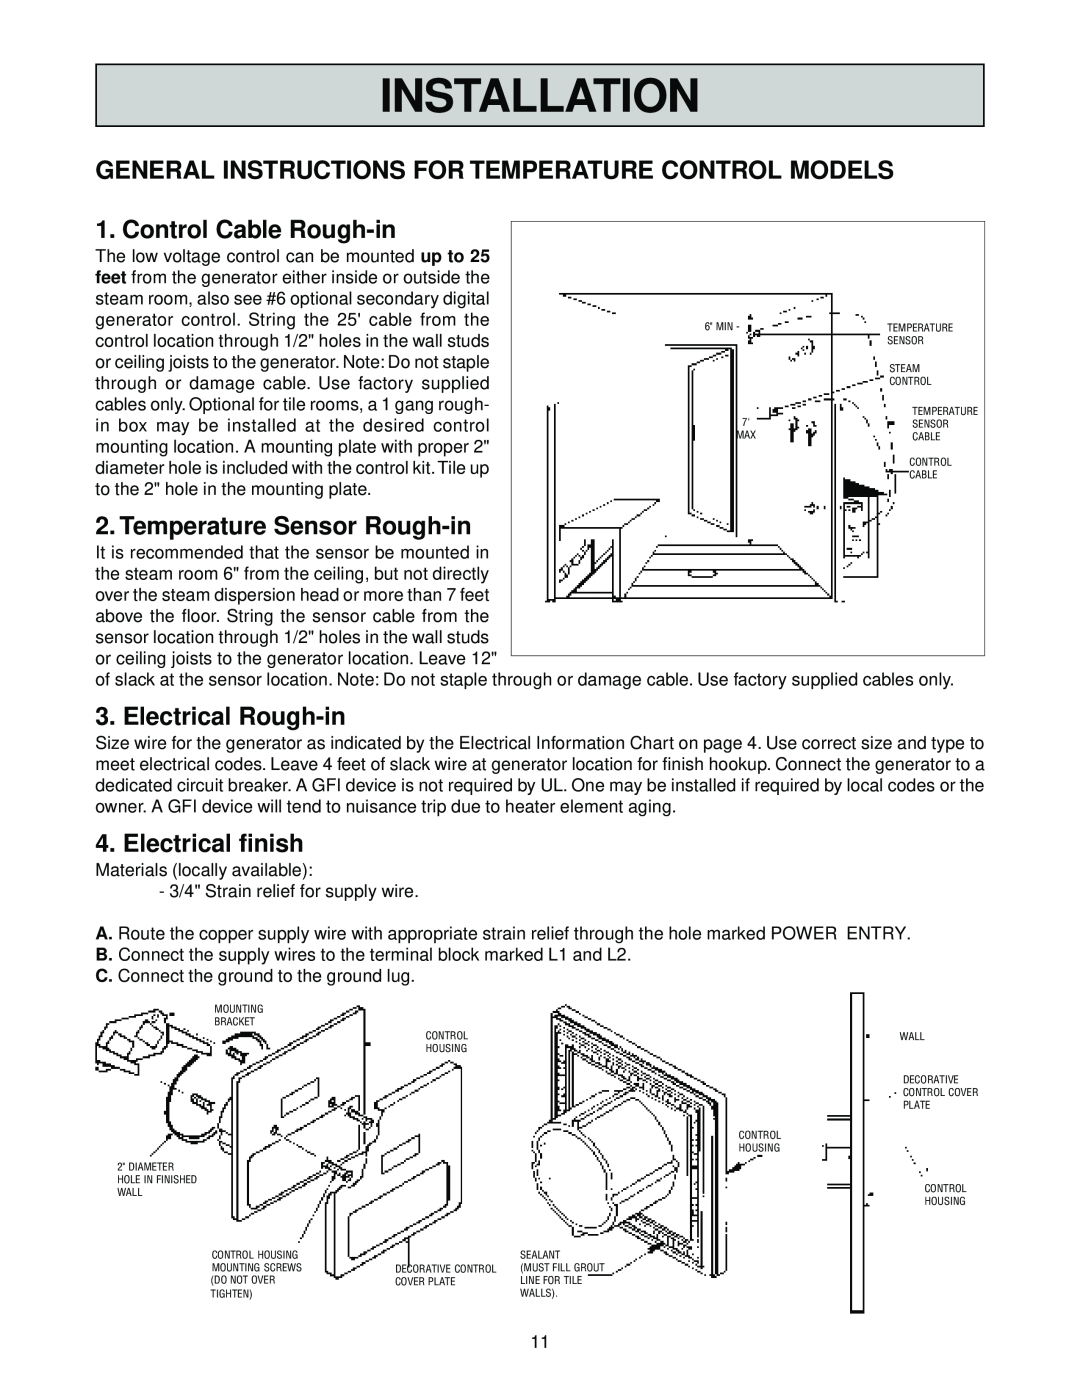 Jacuzzi SteamPro General Instructions For Temperature Control Models, Control Cable Rough-in, Temperature Sensor Rough-in 